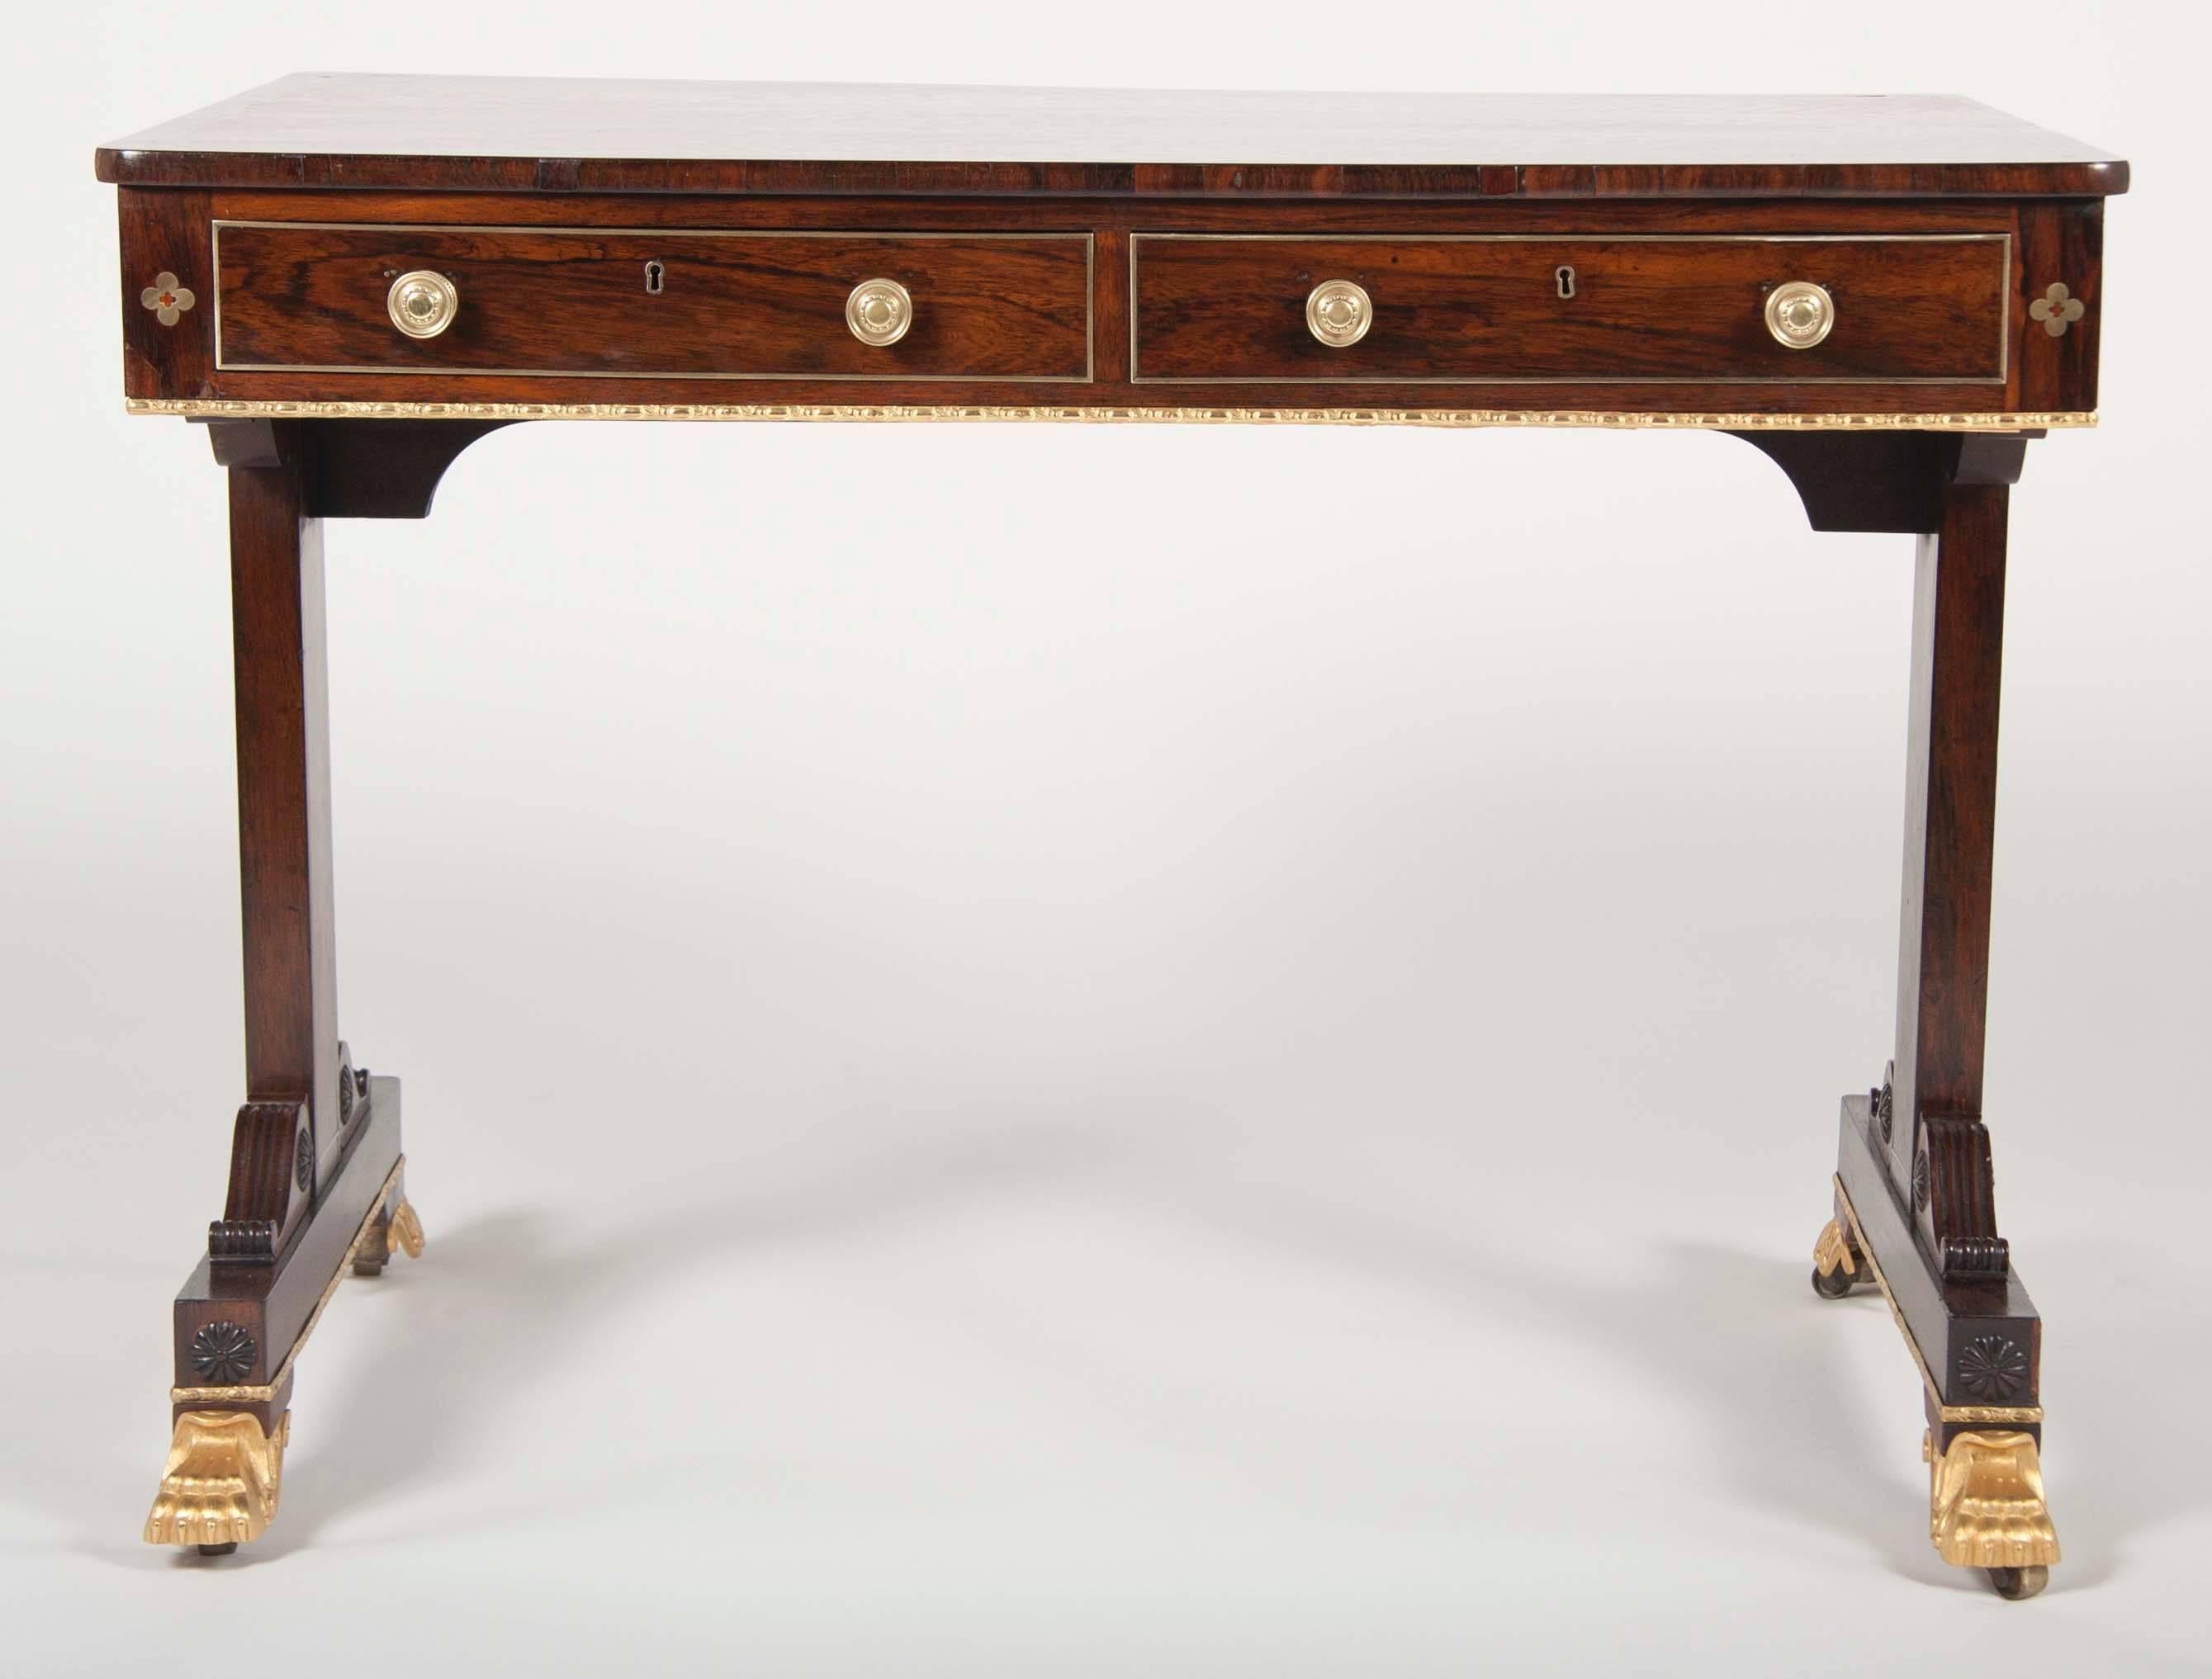 A very fine English Regency Rosewood library table in rosewood with gilt metal and brass quatrefoil inlay. Attributed to Gillows.